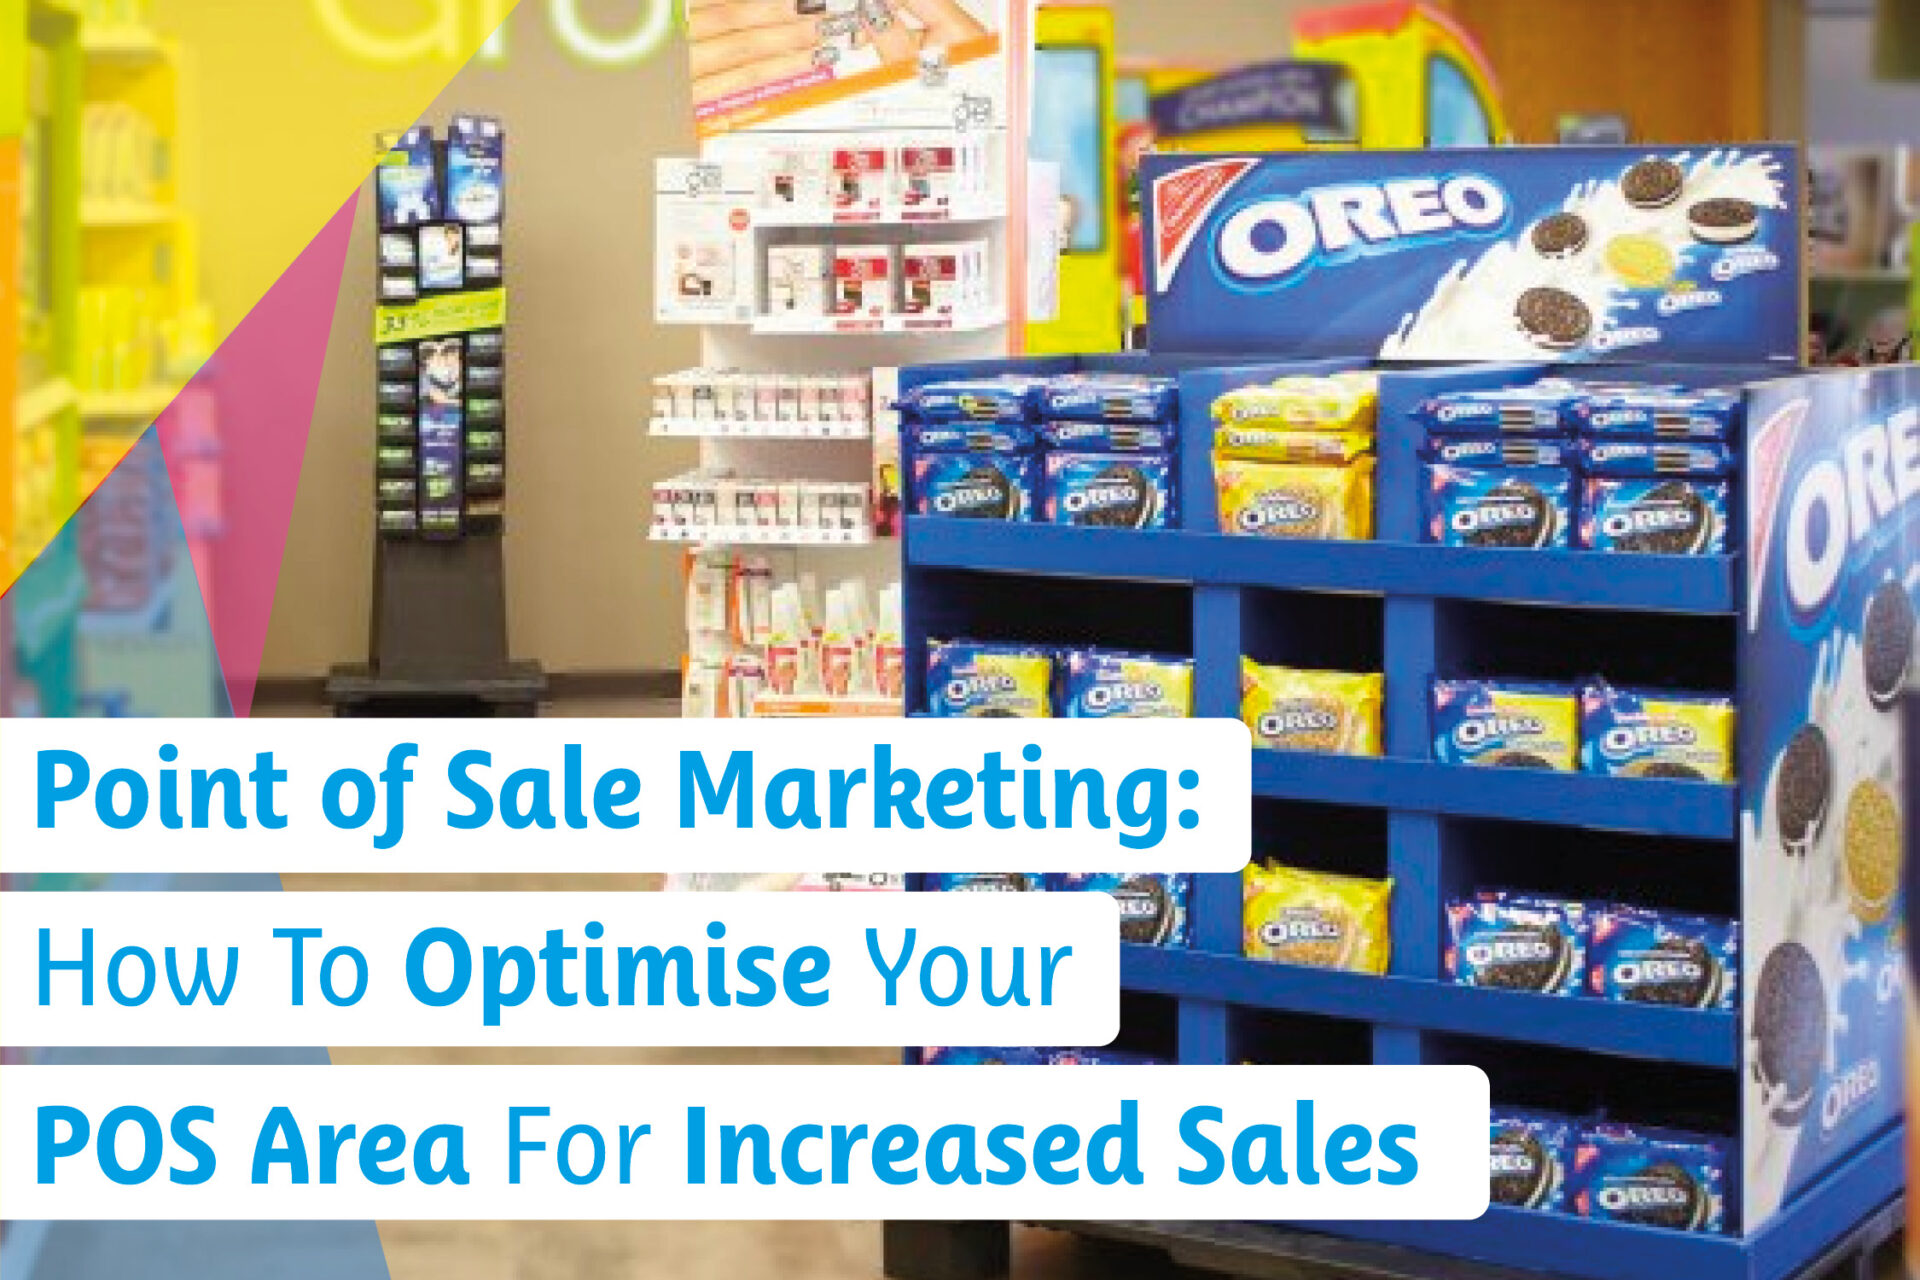 Point of Sale Marketing: How To Optimise Your POS Area For Increased Sales